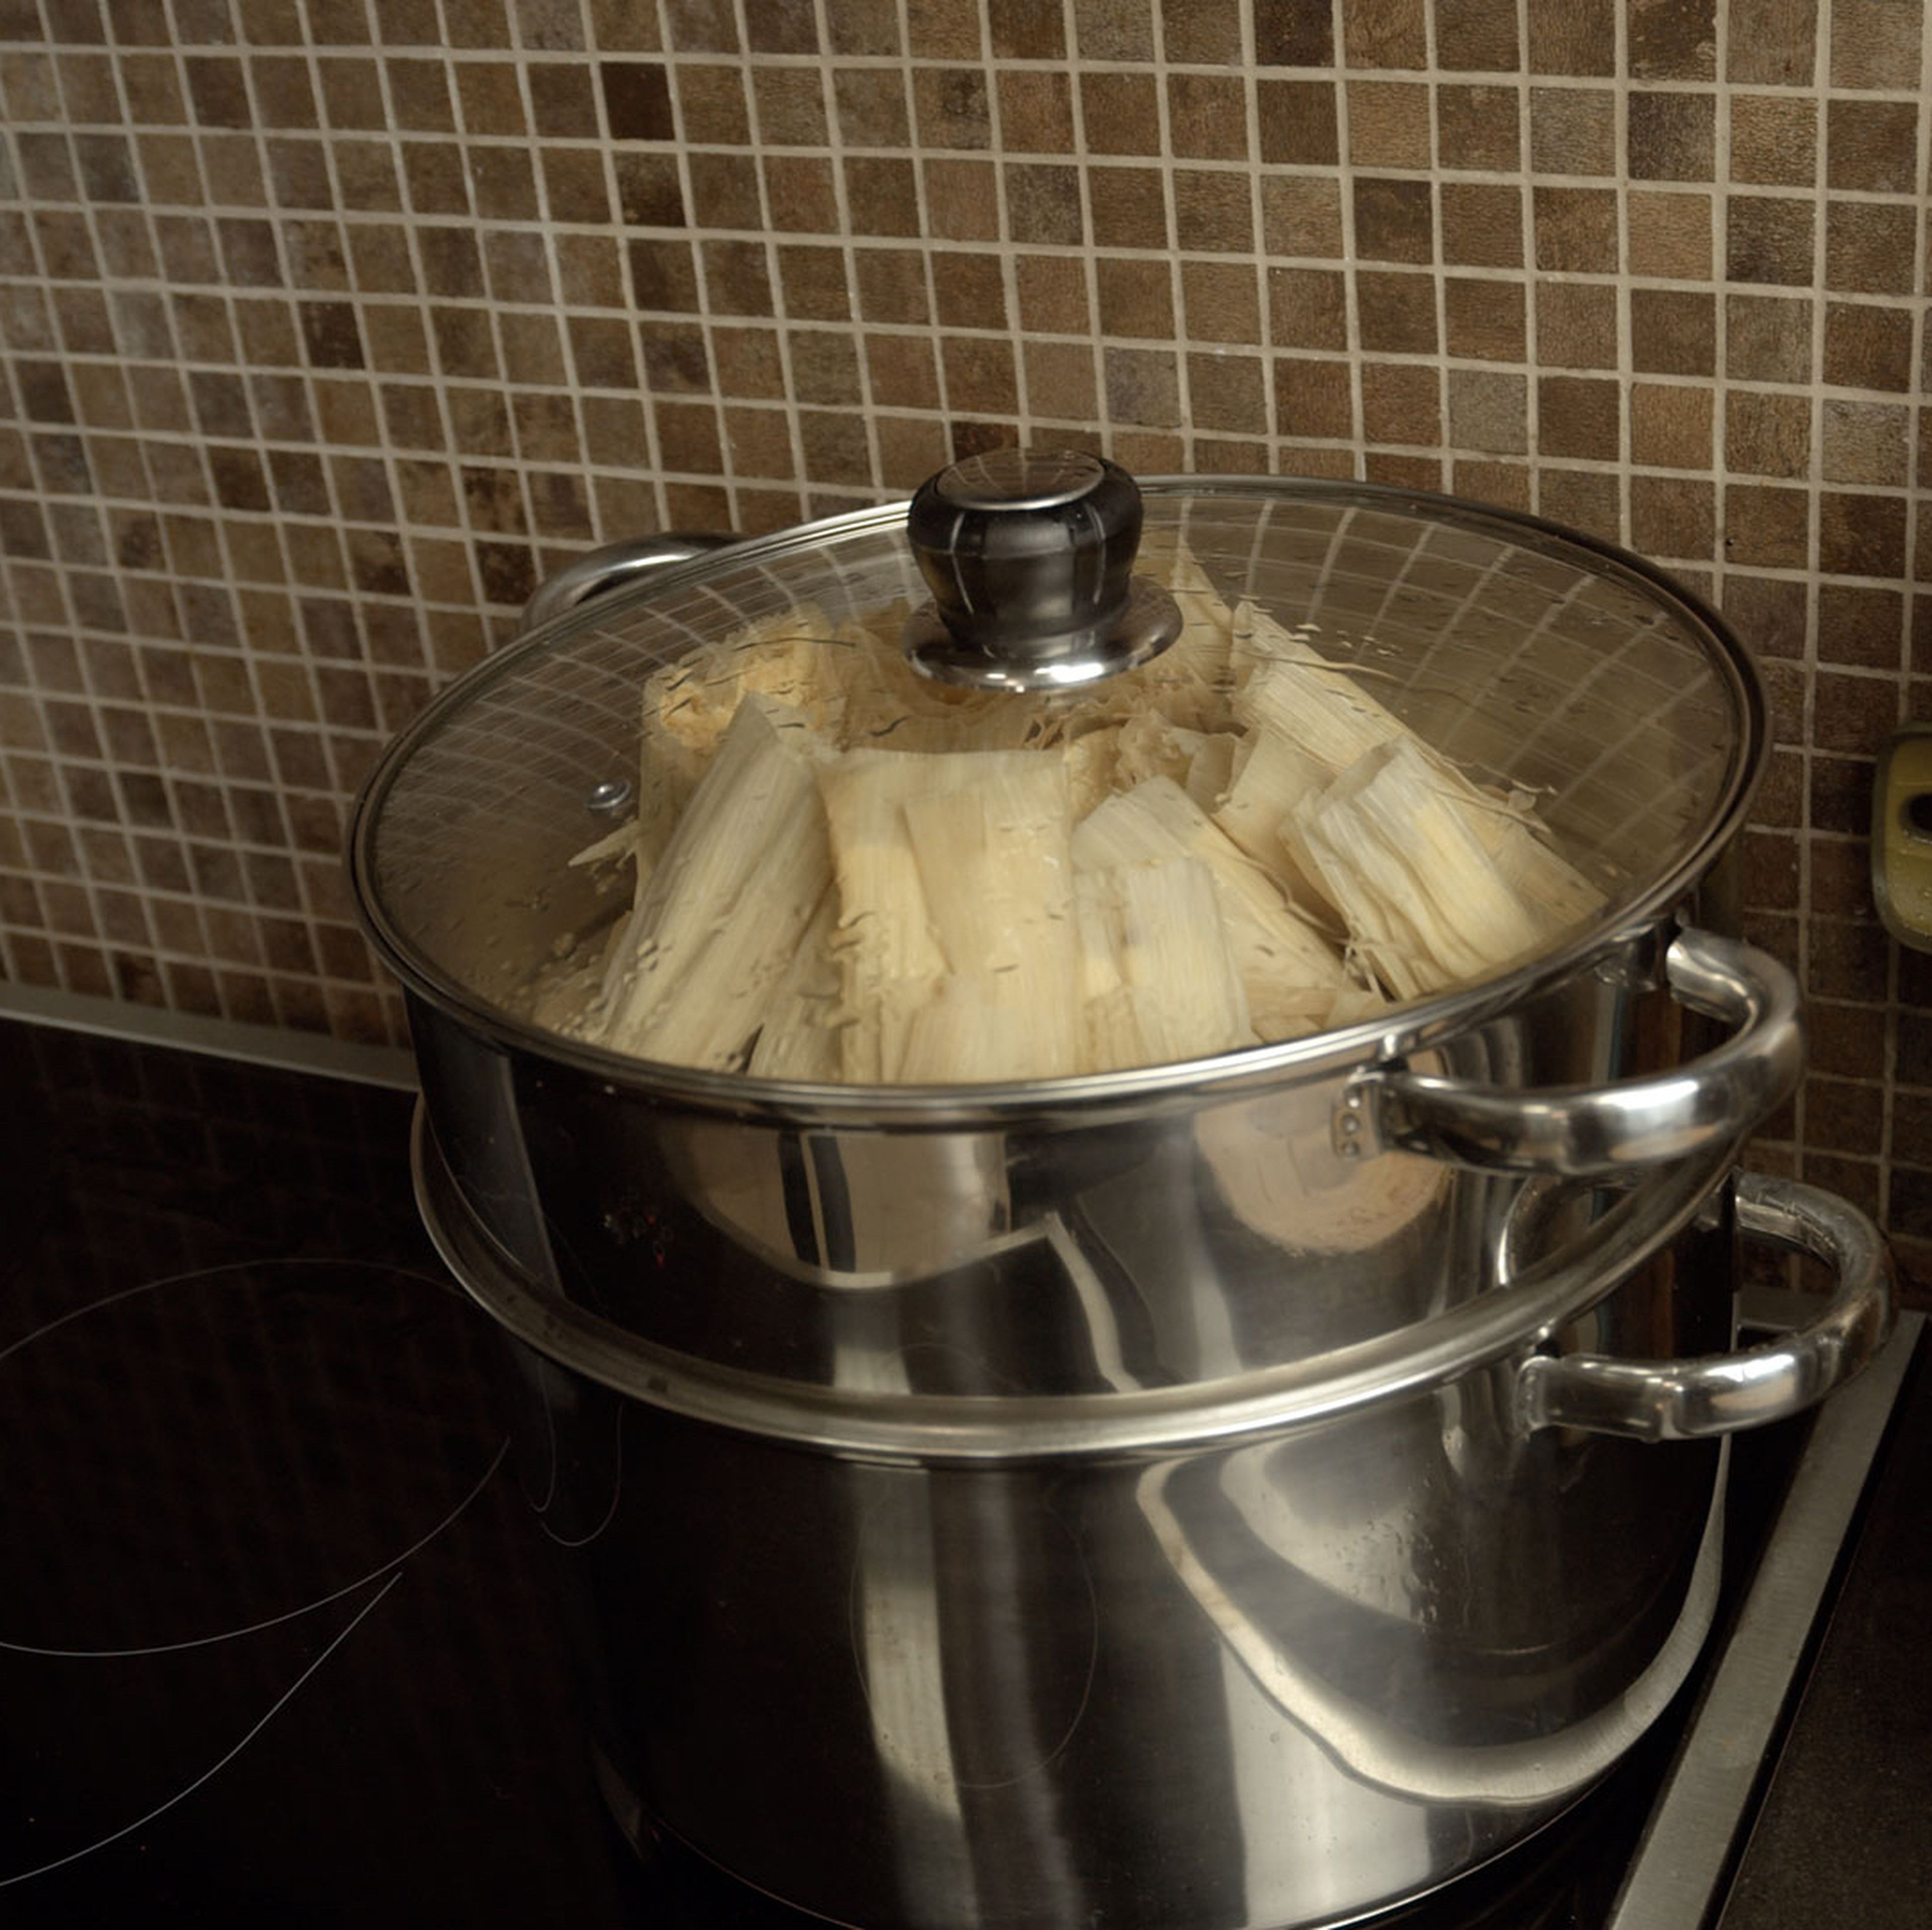 Steam tamales for 35 minutes on medium heat. Do not heat them for too long or on very high heat, otherwise they will be too wet and soggy